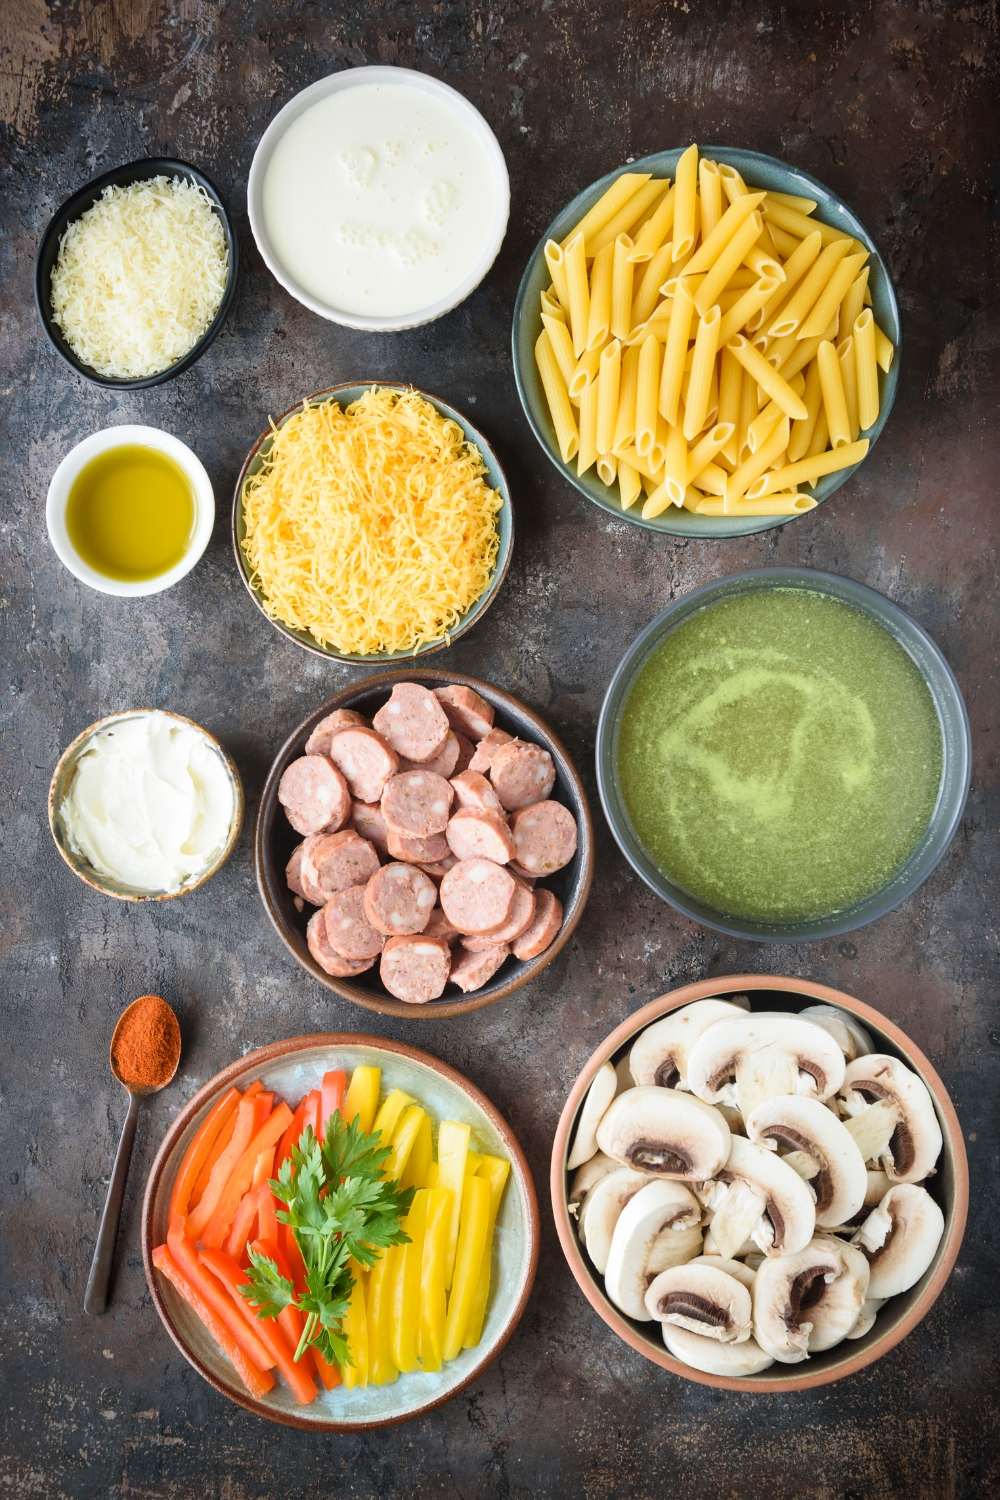 An assortment of ingredients including bowls of sliced sausages, mushrooms, dried pasta, broth, shredded cheese, oil, and sliced bell peppers.